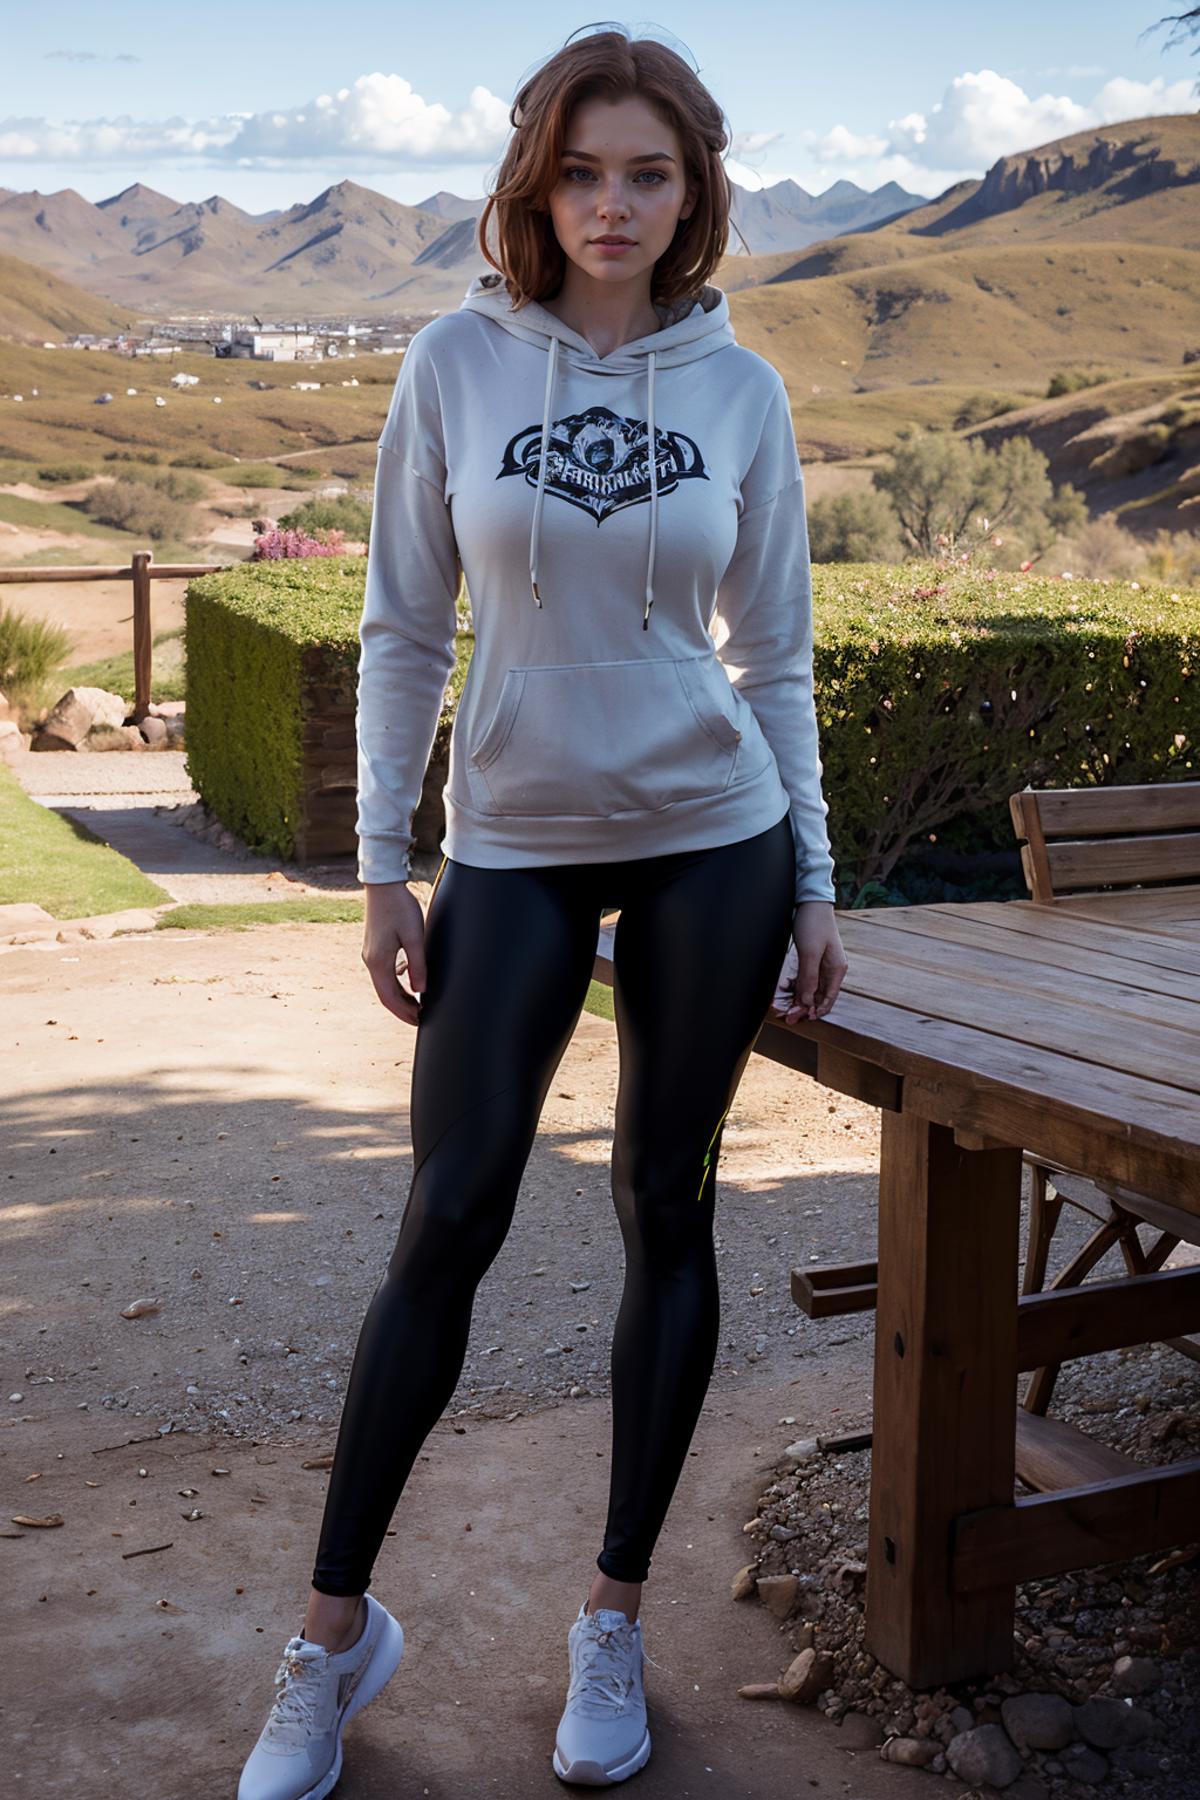 A woman standing outside wearing black leggings and a white hoodie.